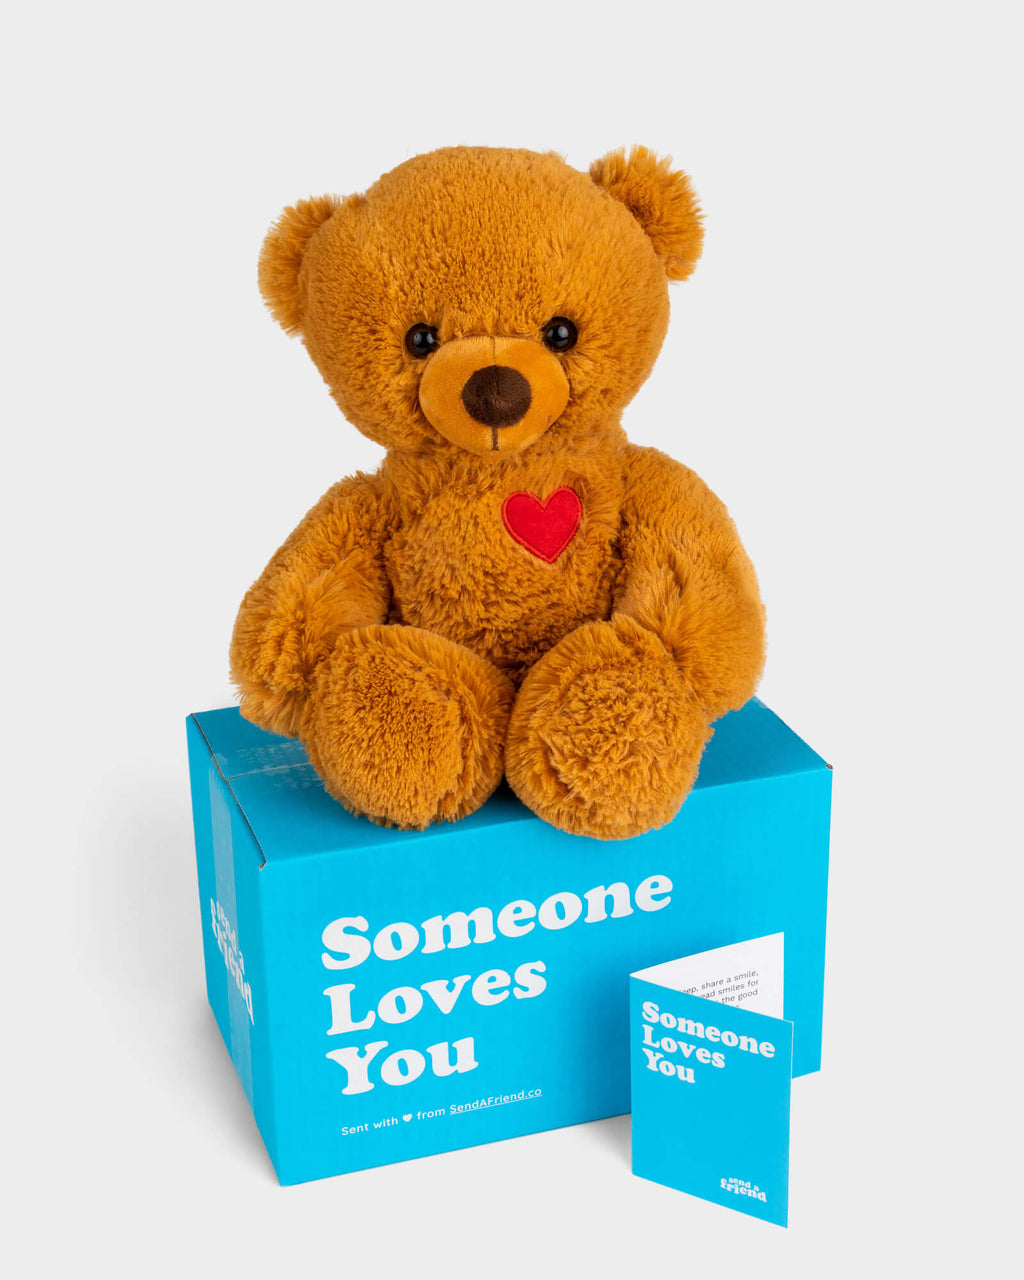 Take Care Teddy Bear at From You Flowers